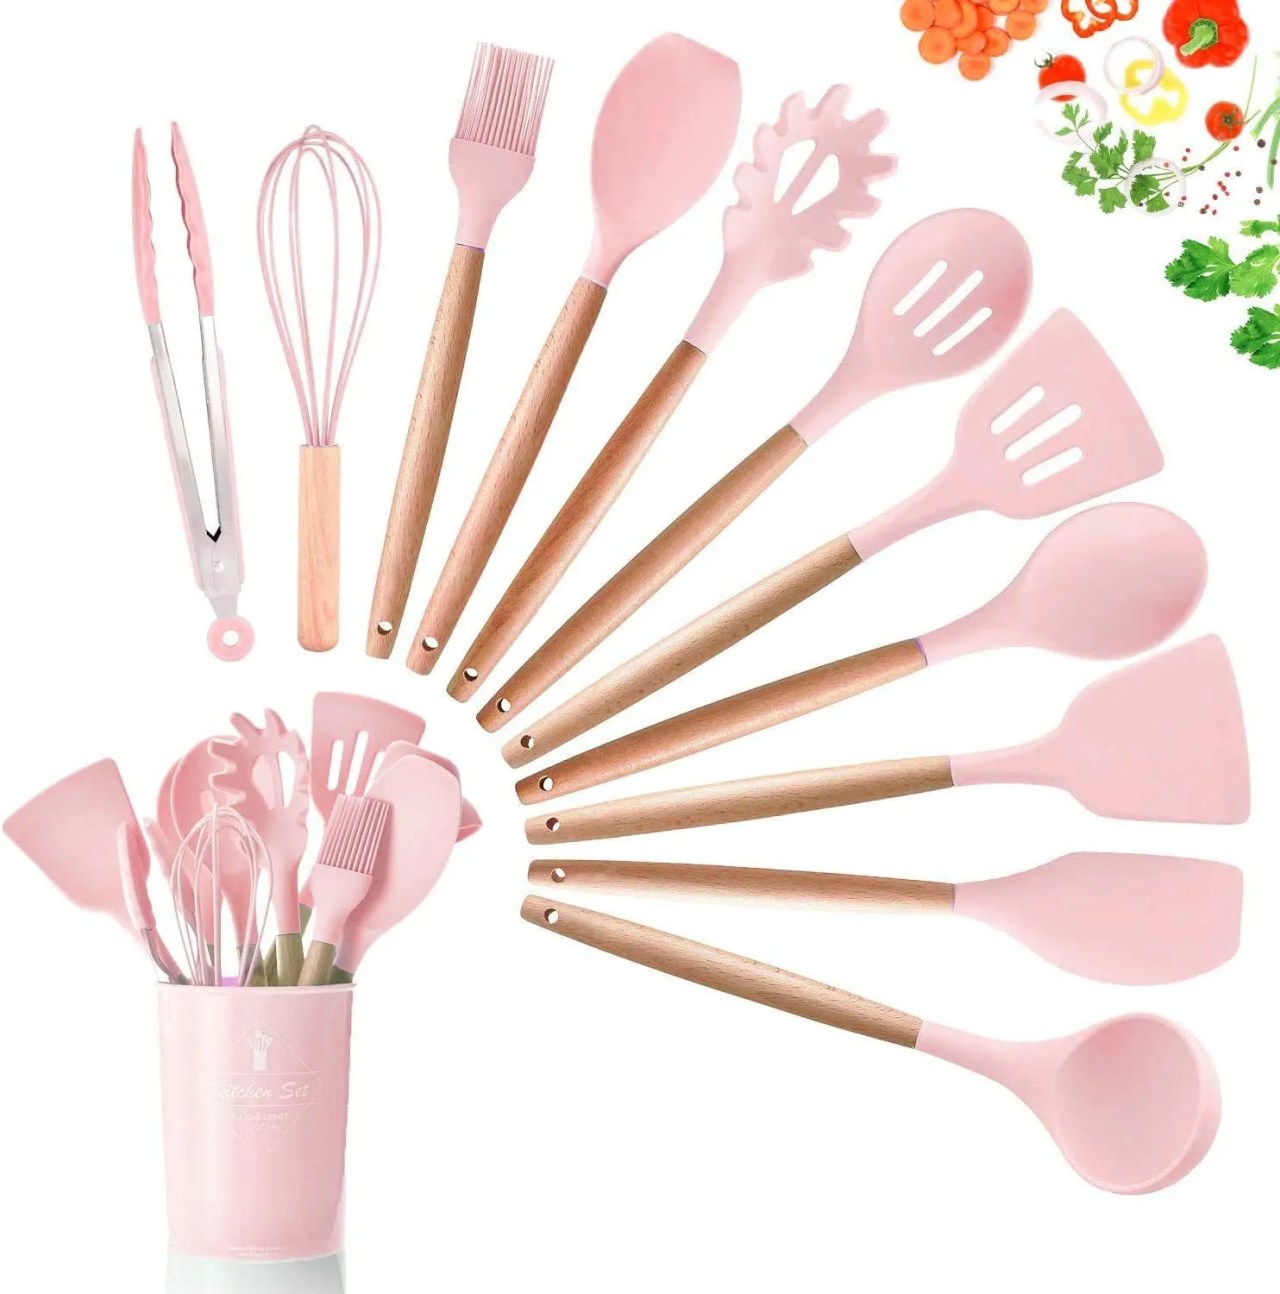 pink kitchen utensils with wooden handles from amazon